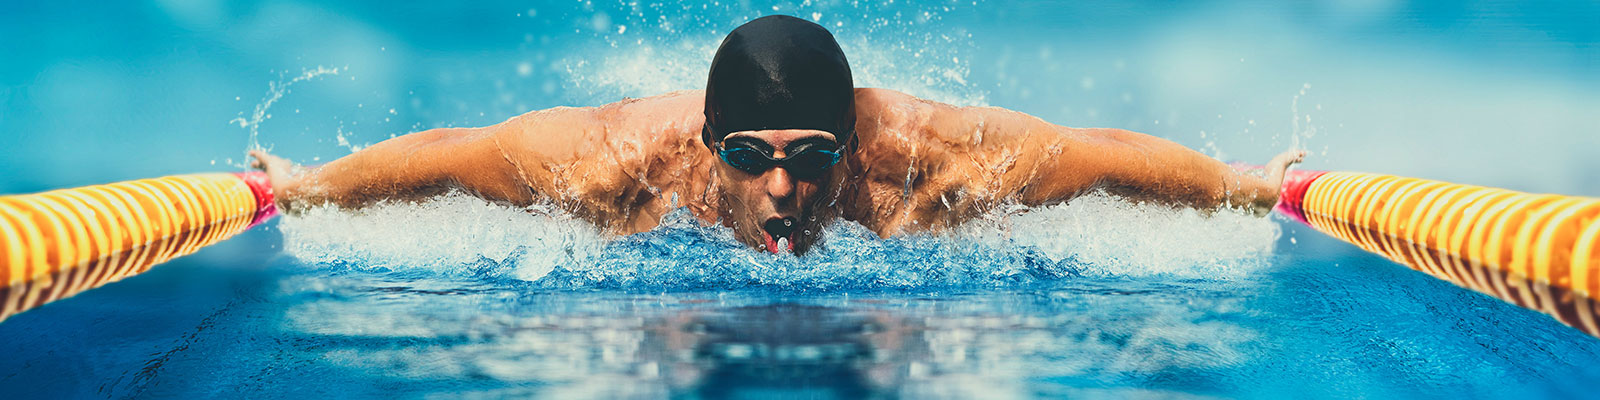 front on photograph of swimmer mid butterfly stroke